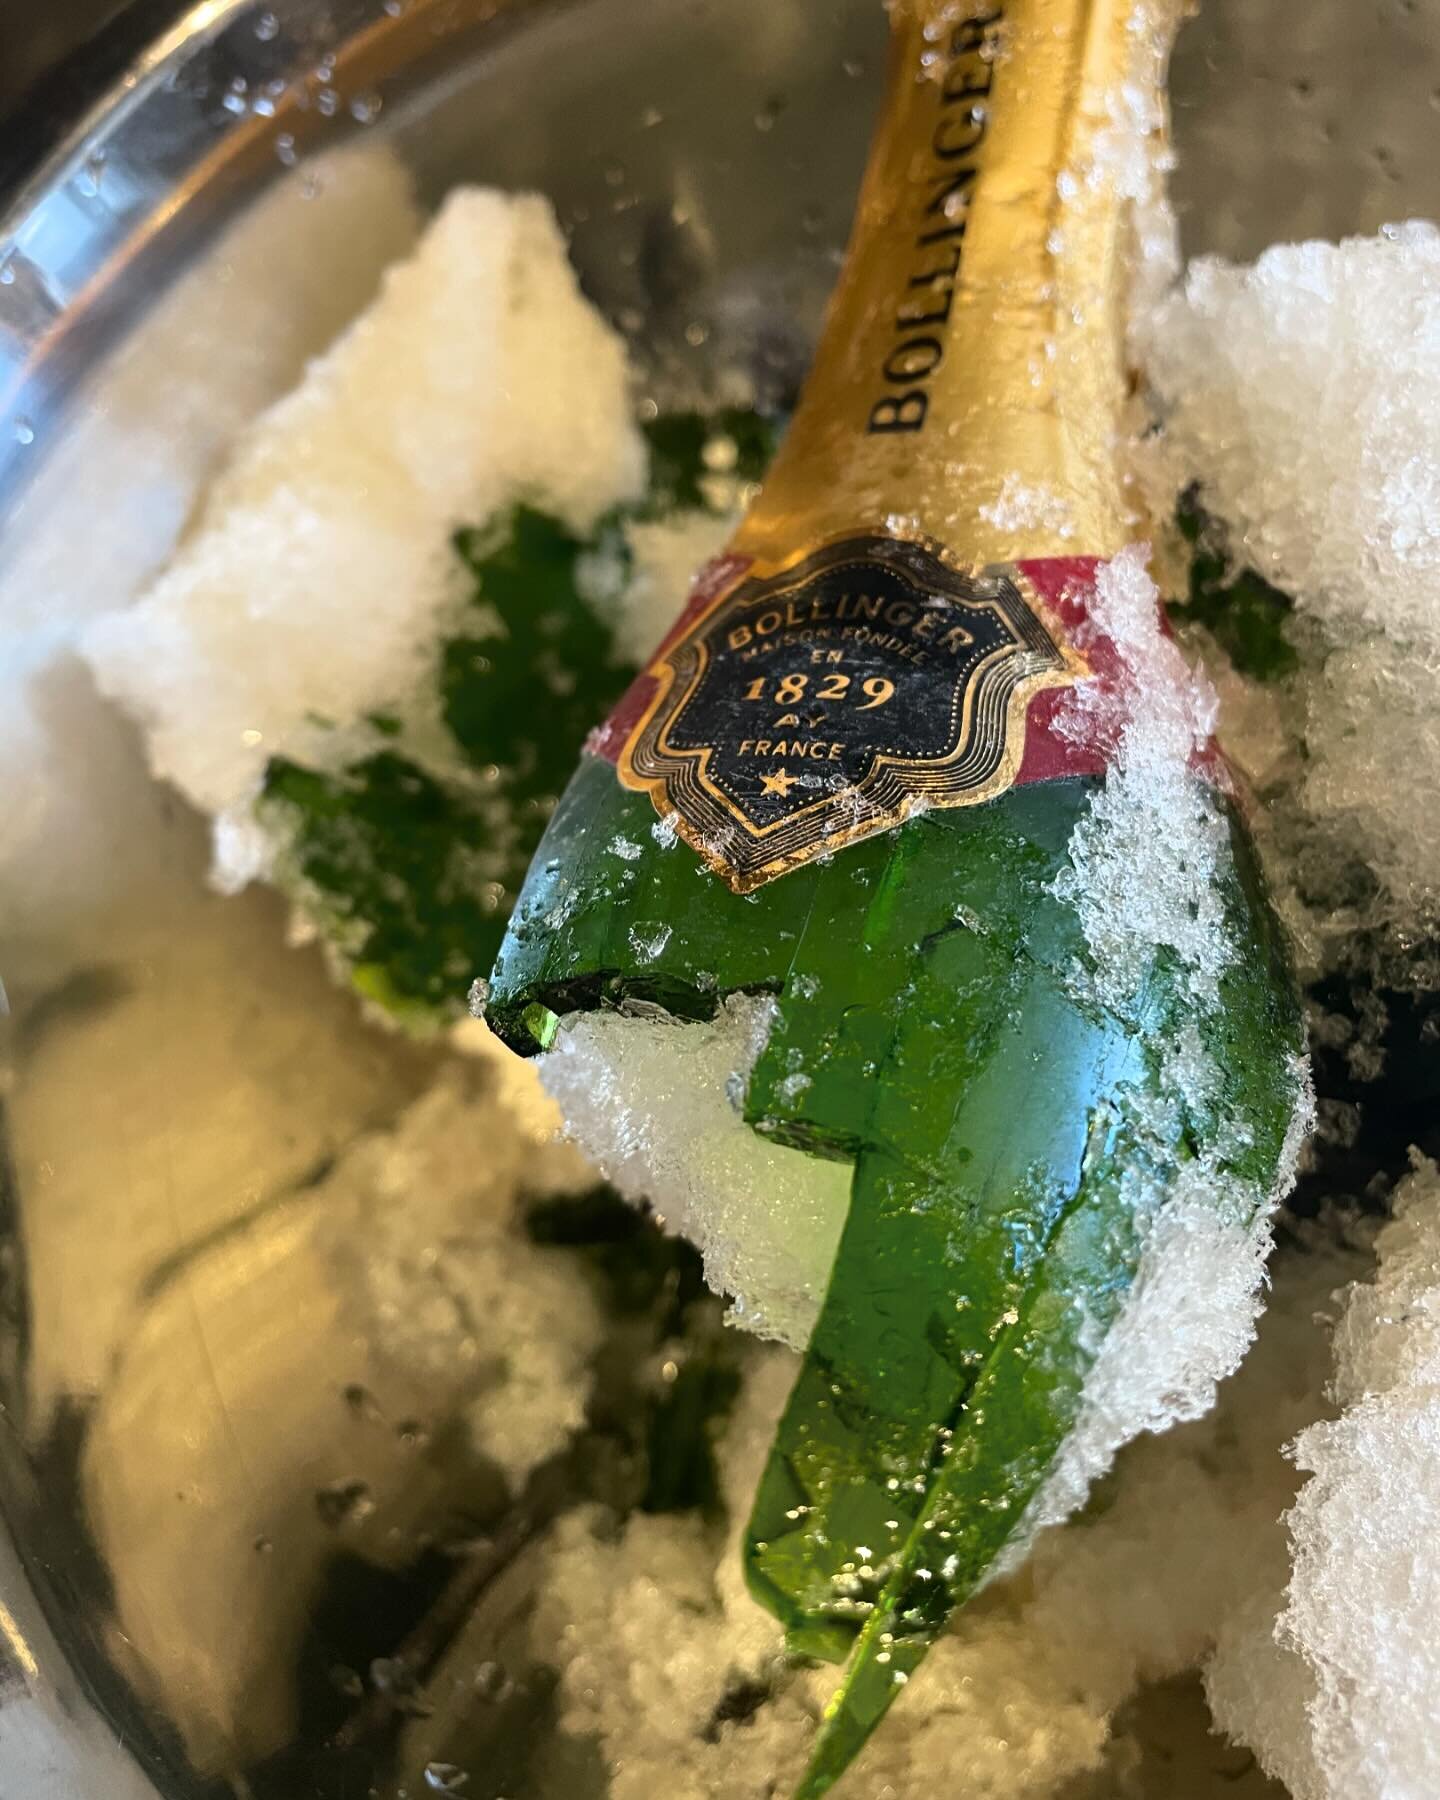 When you put a bottle Bollinger in the freezer and then get distracted by the other wines on the table&hellip;.. 🥶😂🍾

#bollinger #bubbles #champagne #ohno